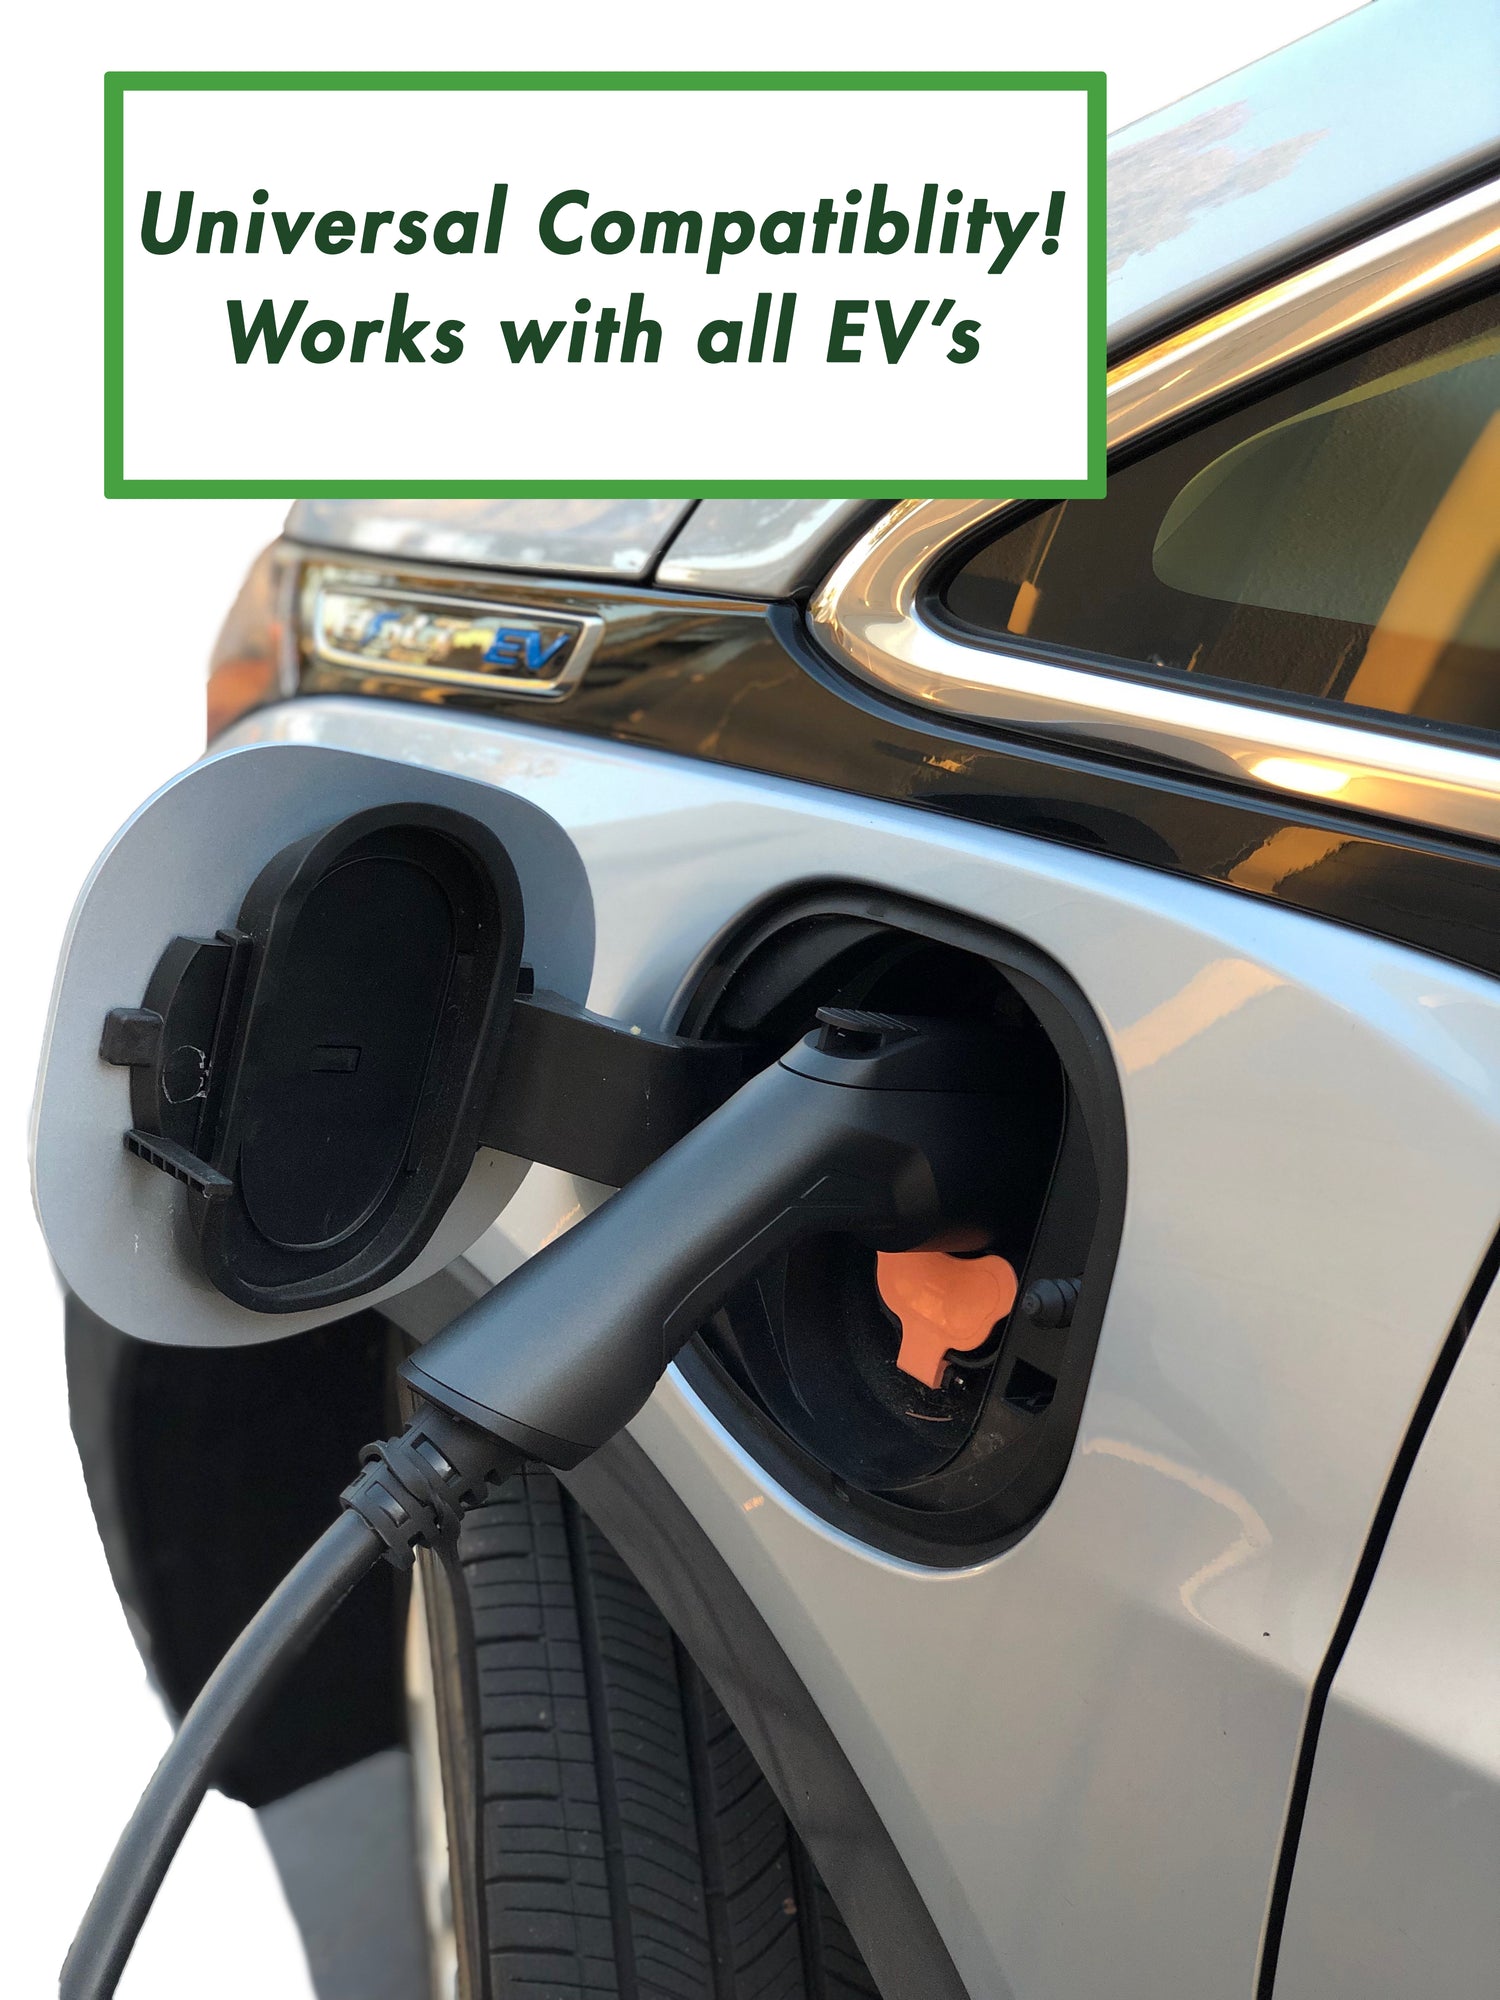 Choose the Perfect 48 AMP EV charger for Your Charging Needs